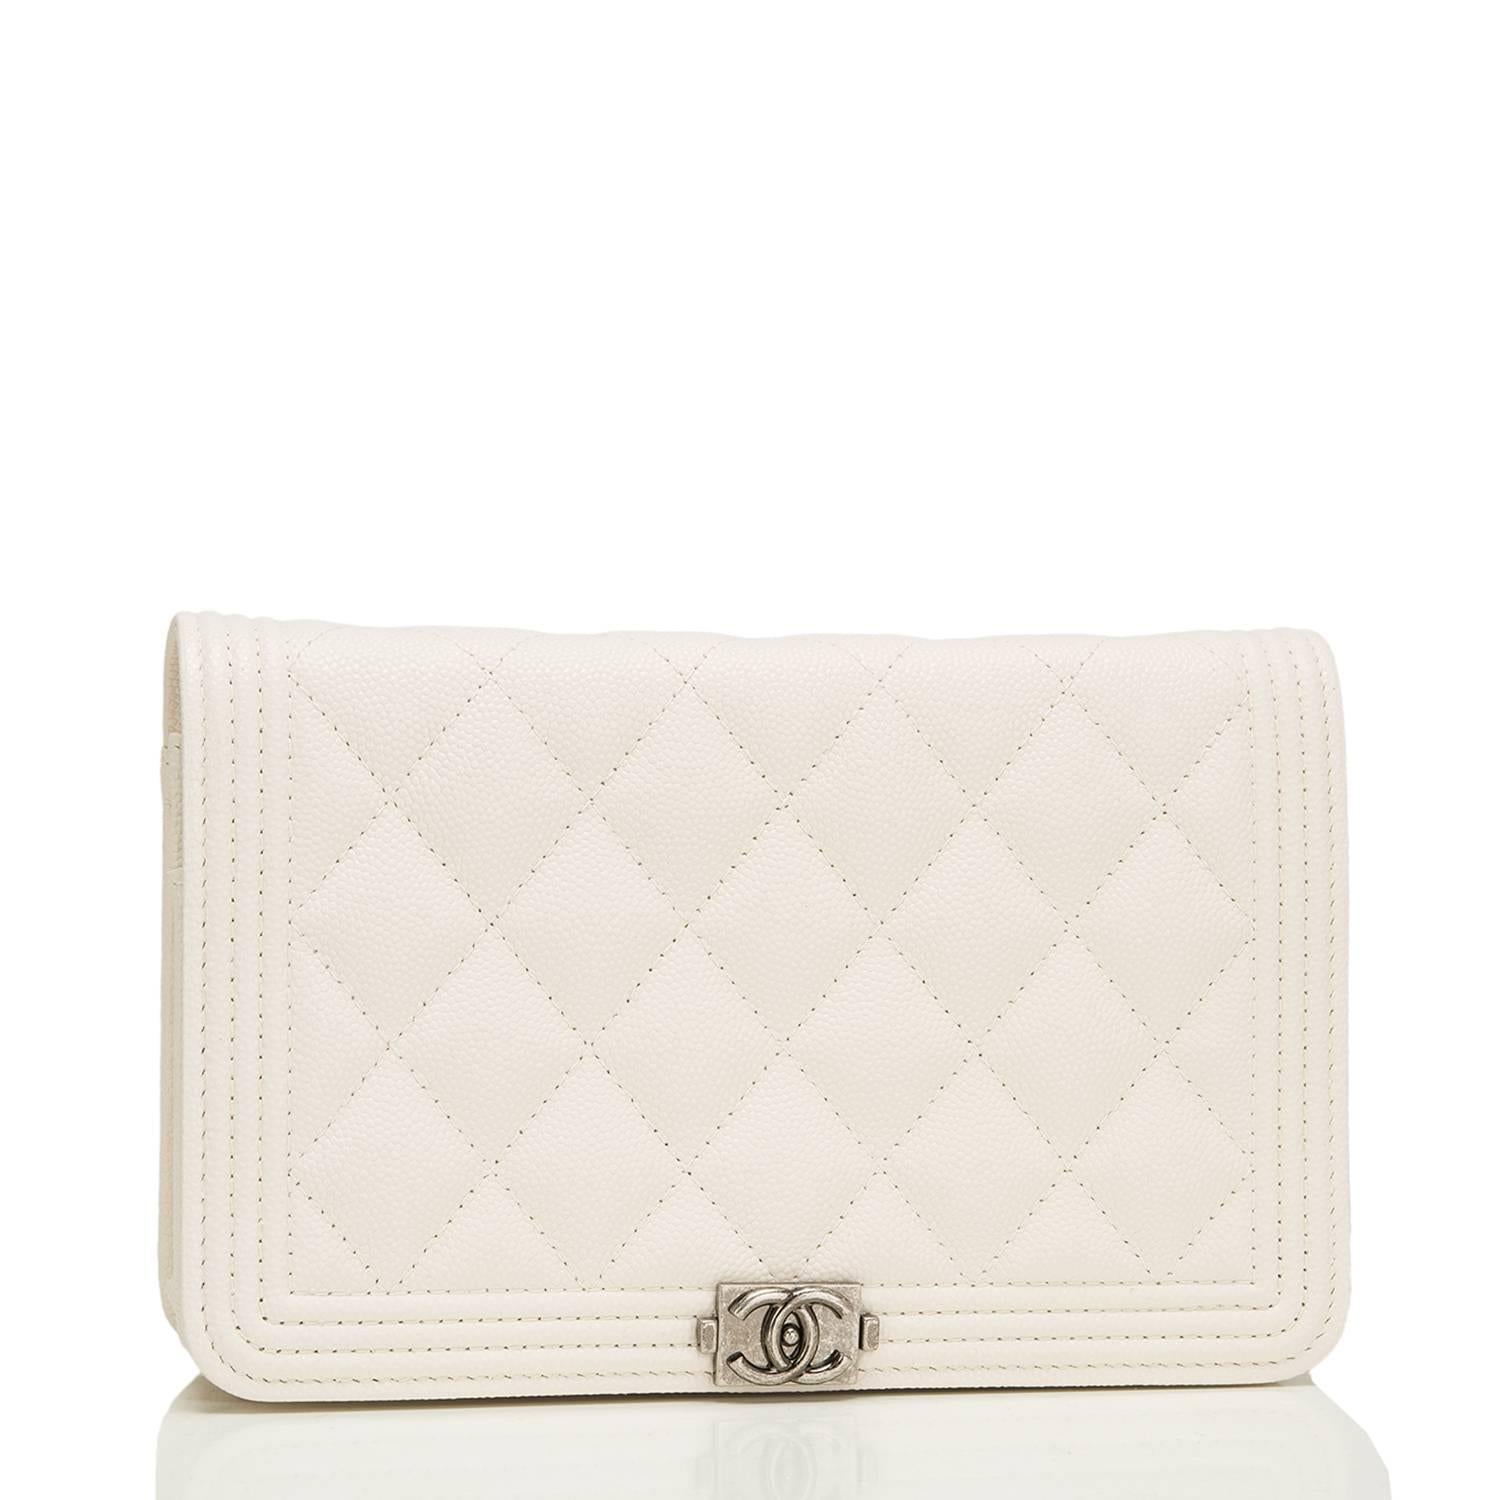 Chanel quilted Boy Wallet on Chain (WOC) of ivory caviar leather with ruthenium hardware.

This Wallet On Chain features a front flap with the signature Le Boy CC charm and hidden snap closure and a ruthenium metal chain link with ivory leather